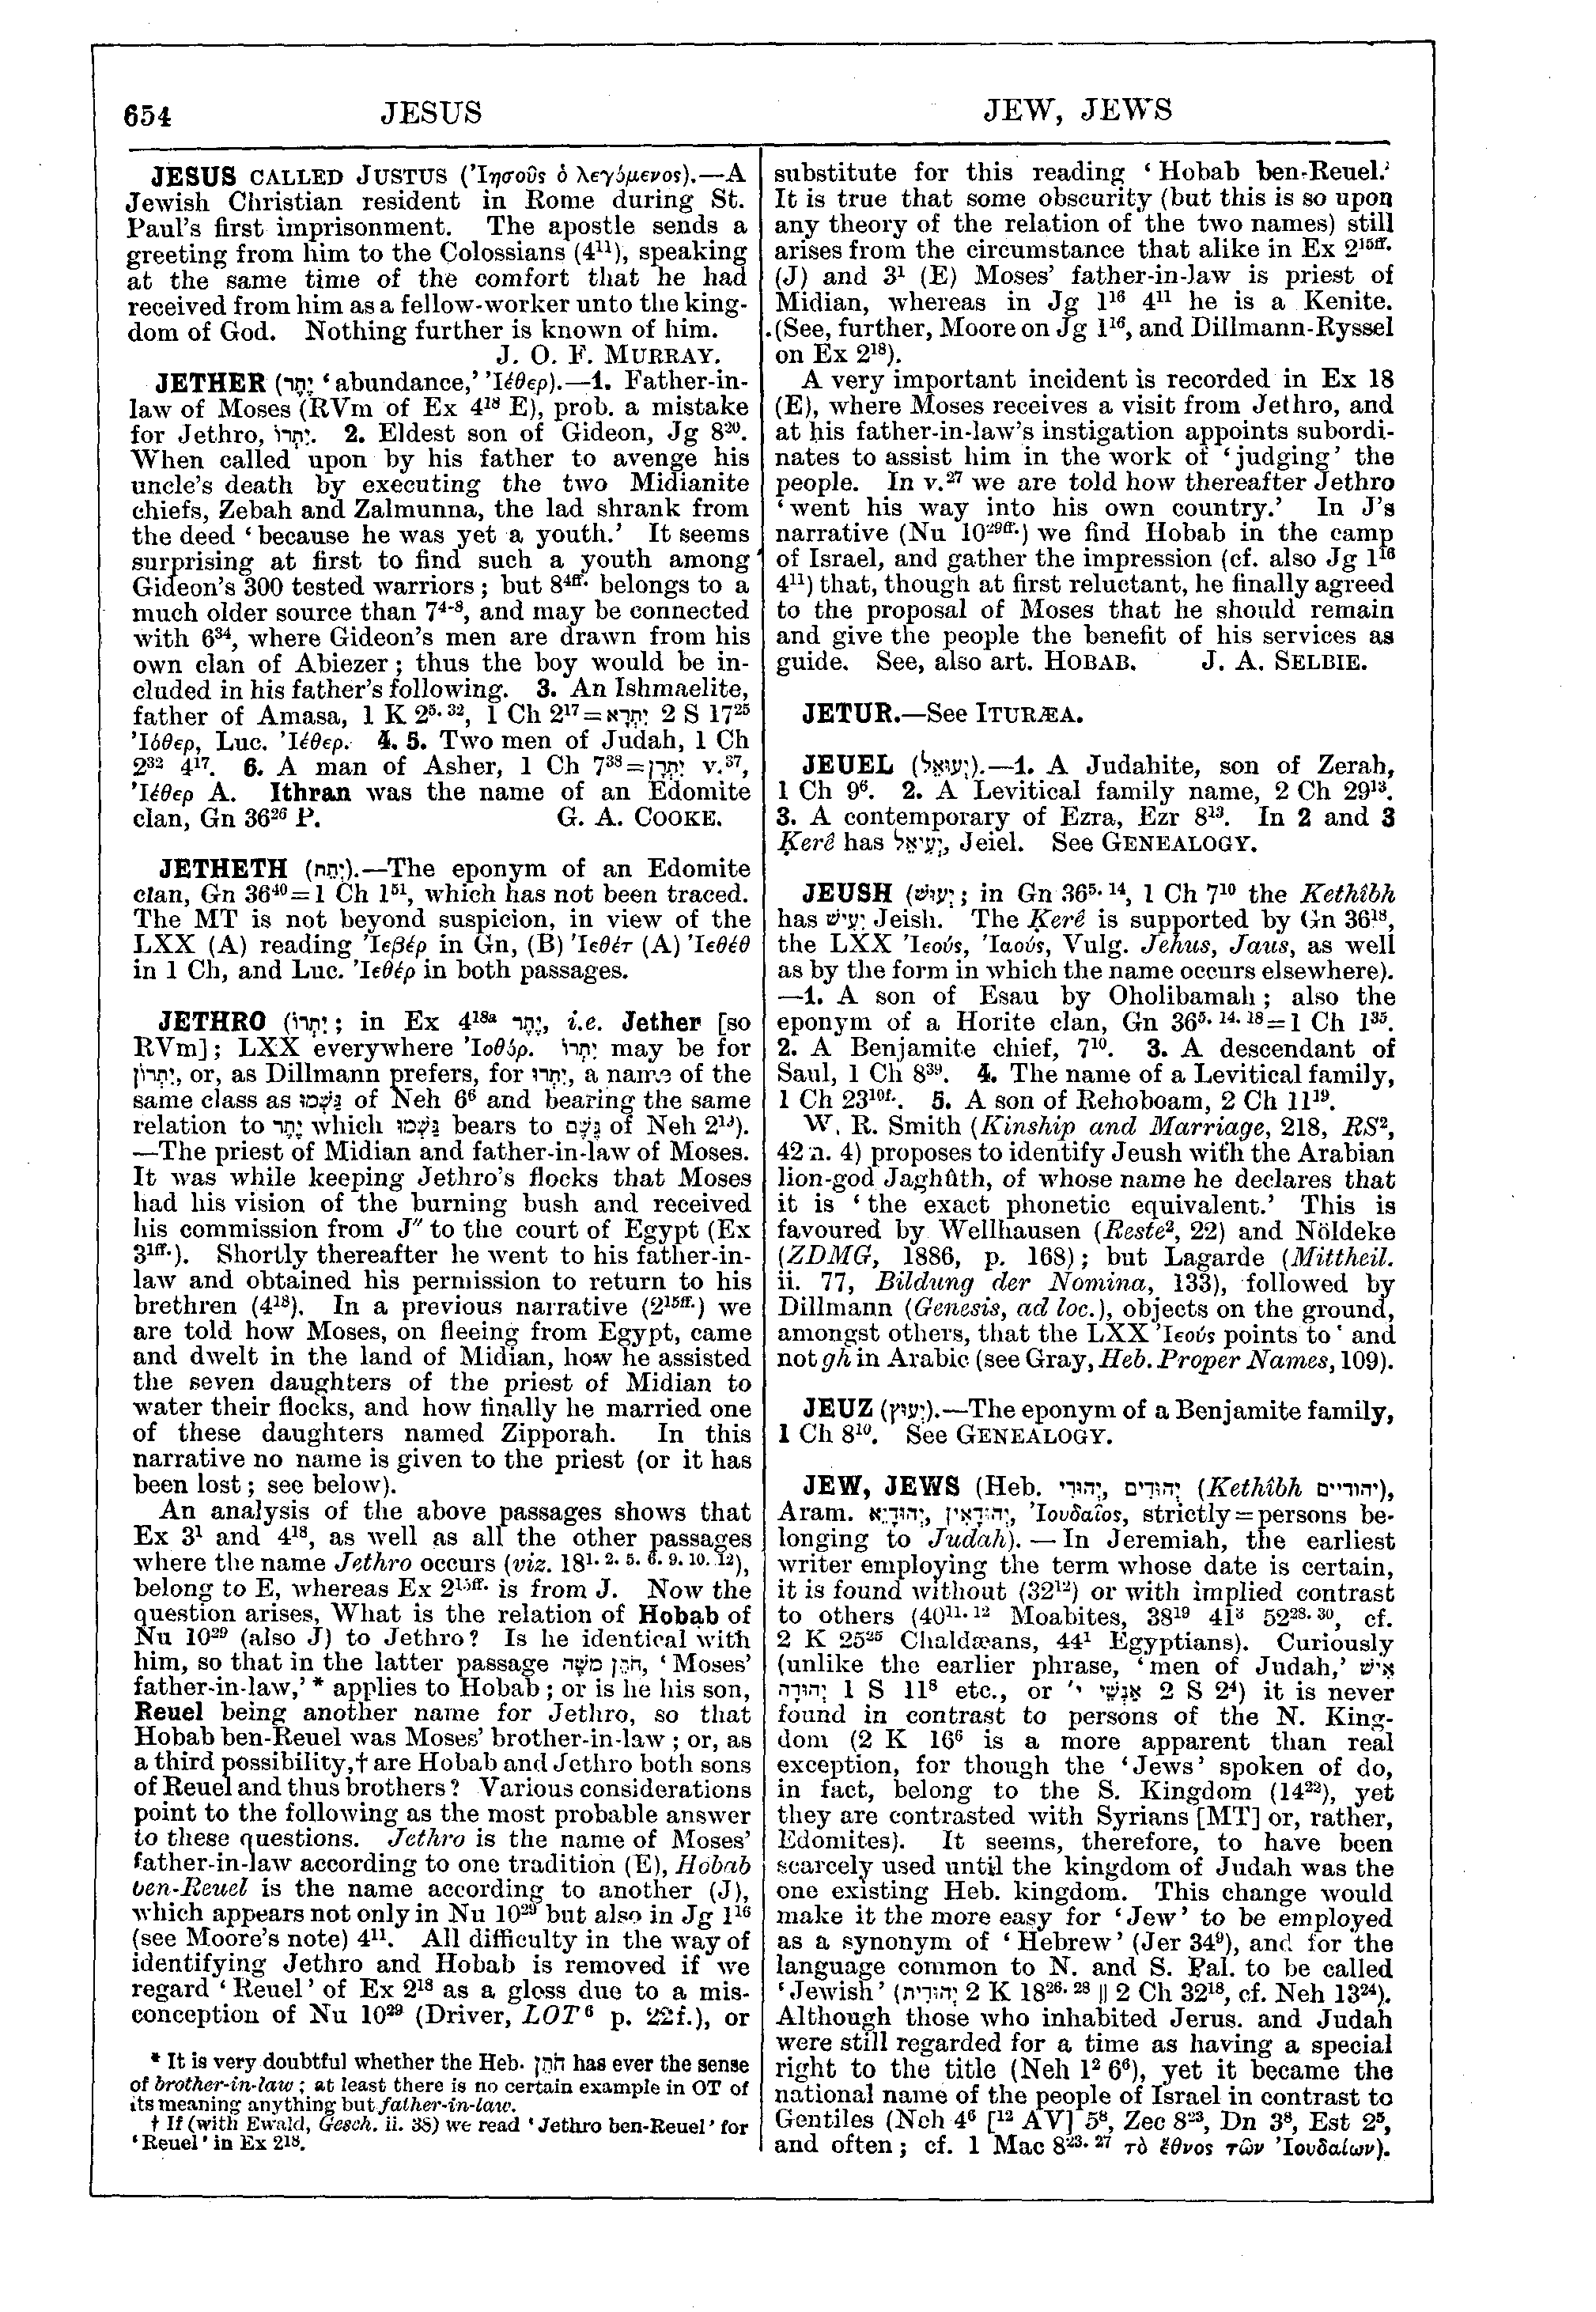 Image of page 654